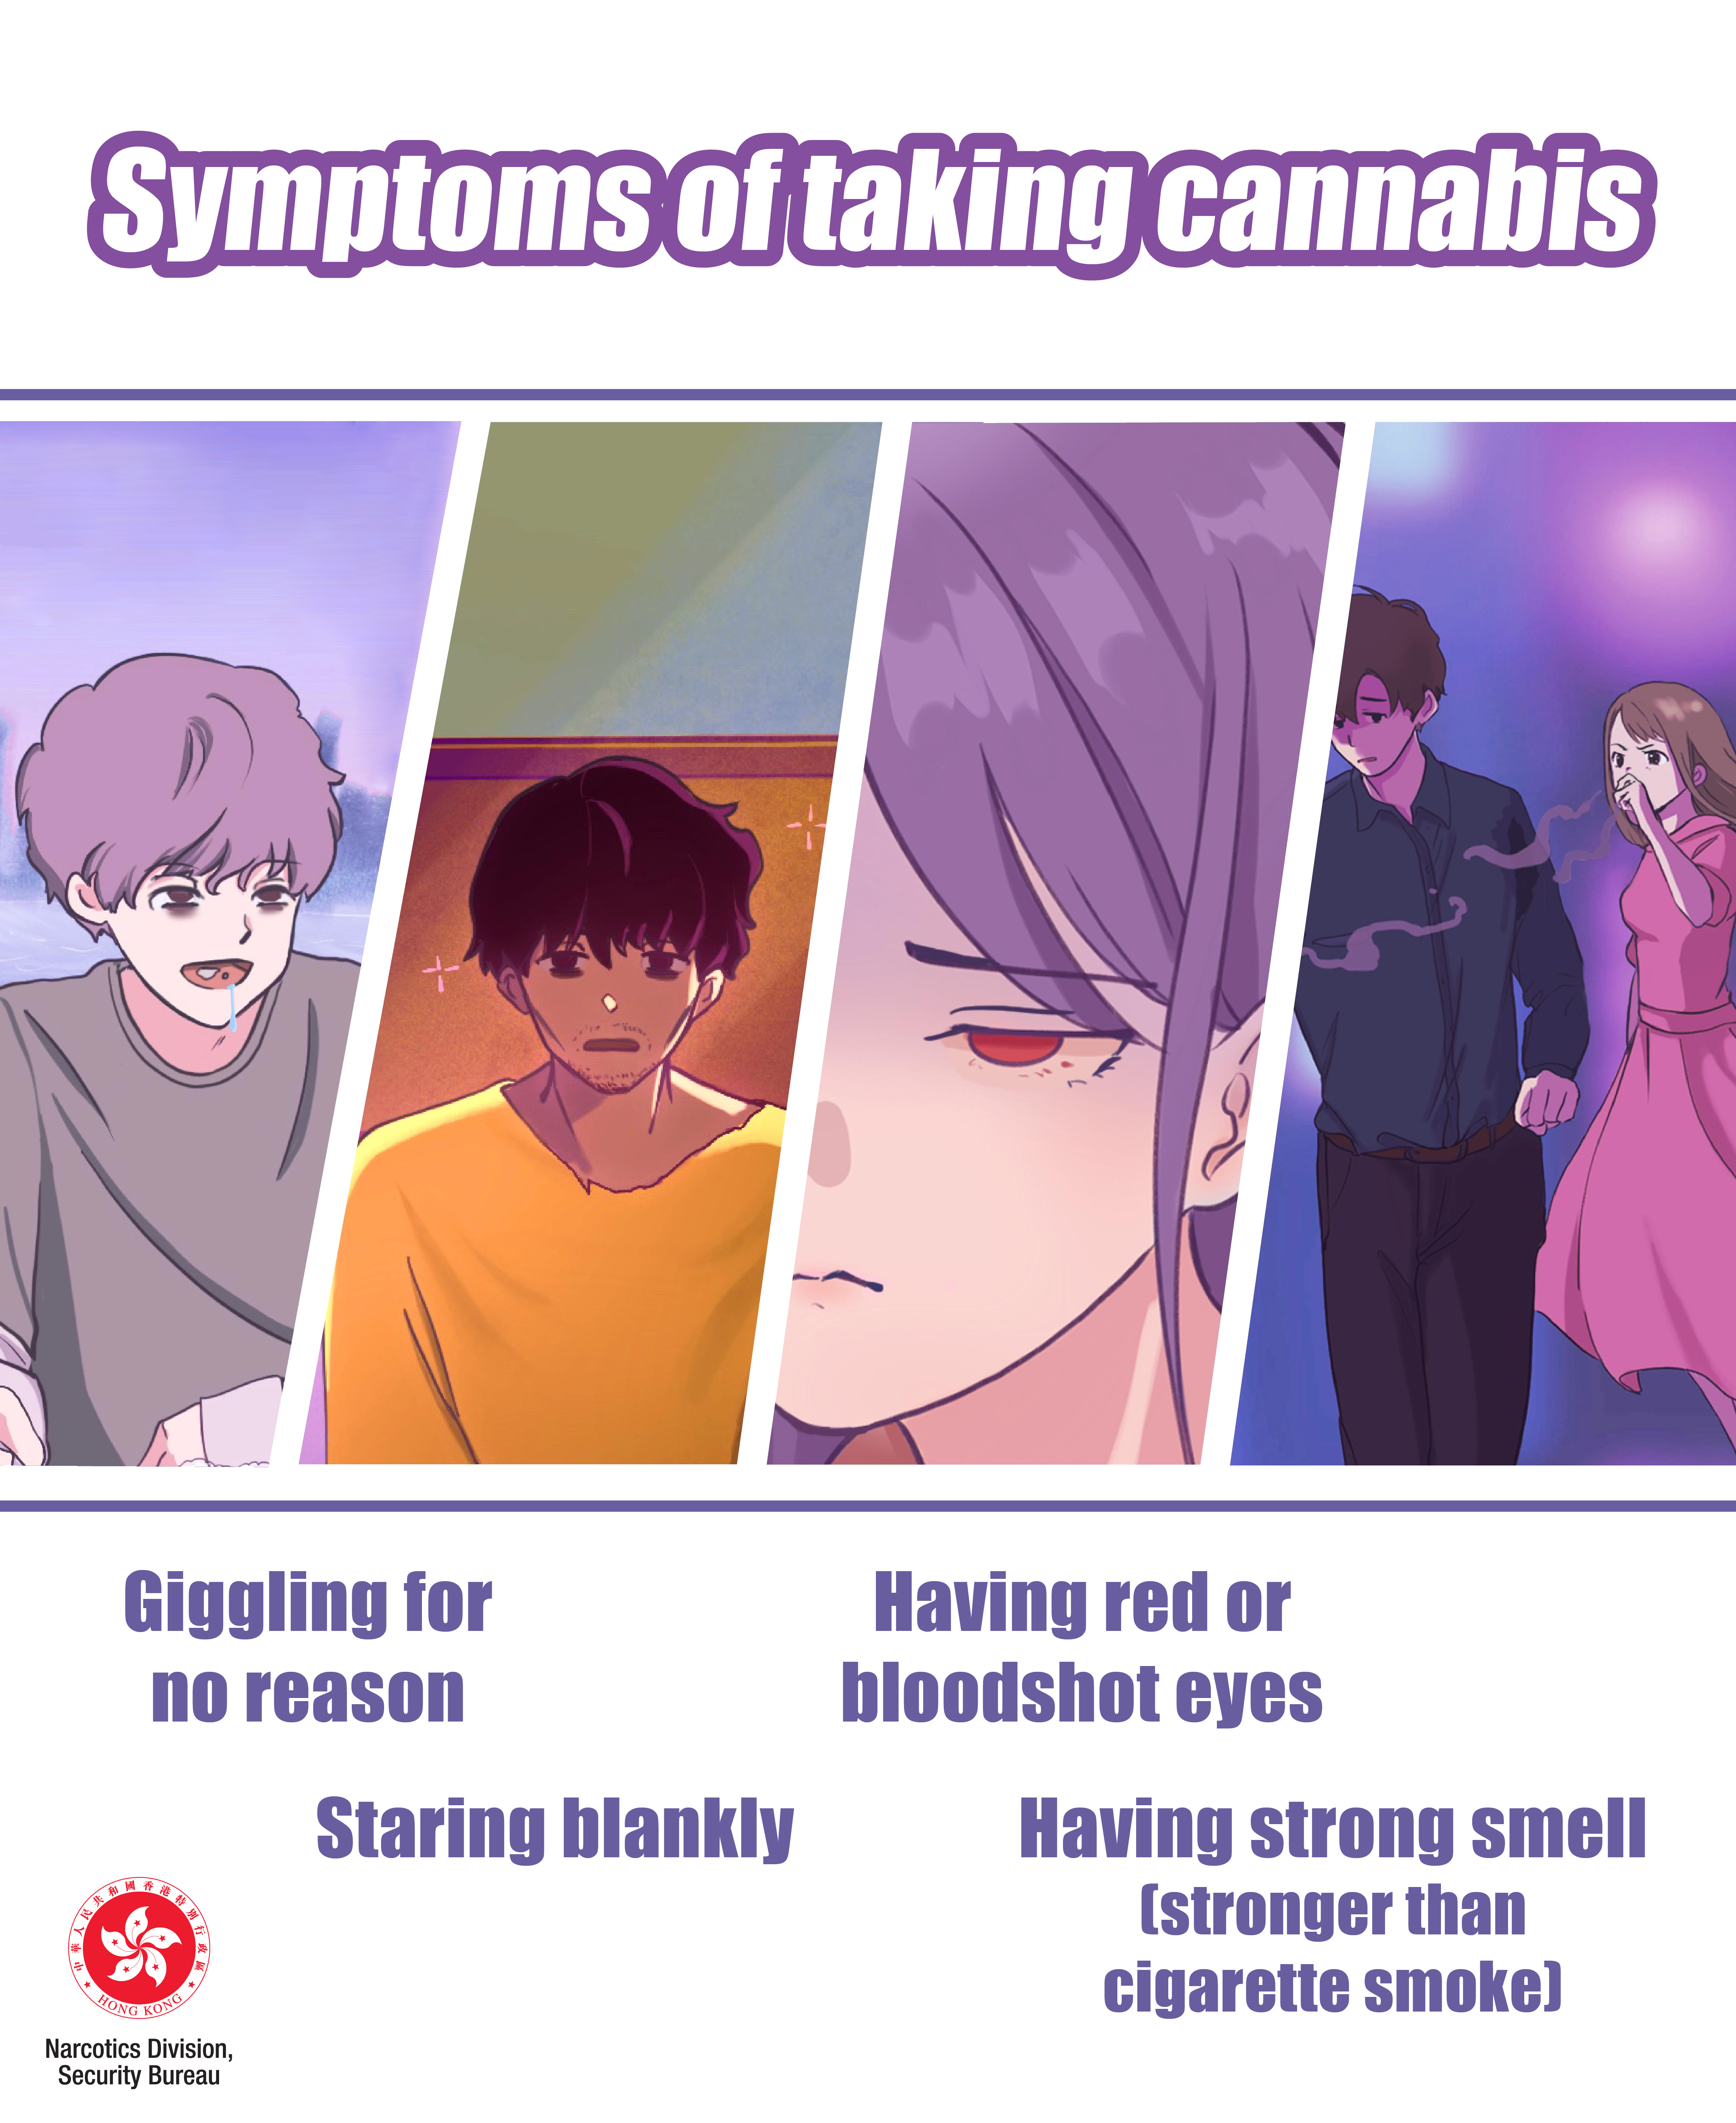 Symptoms of taking cannabis Poster